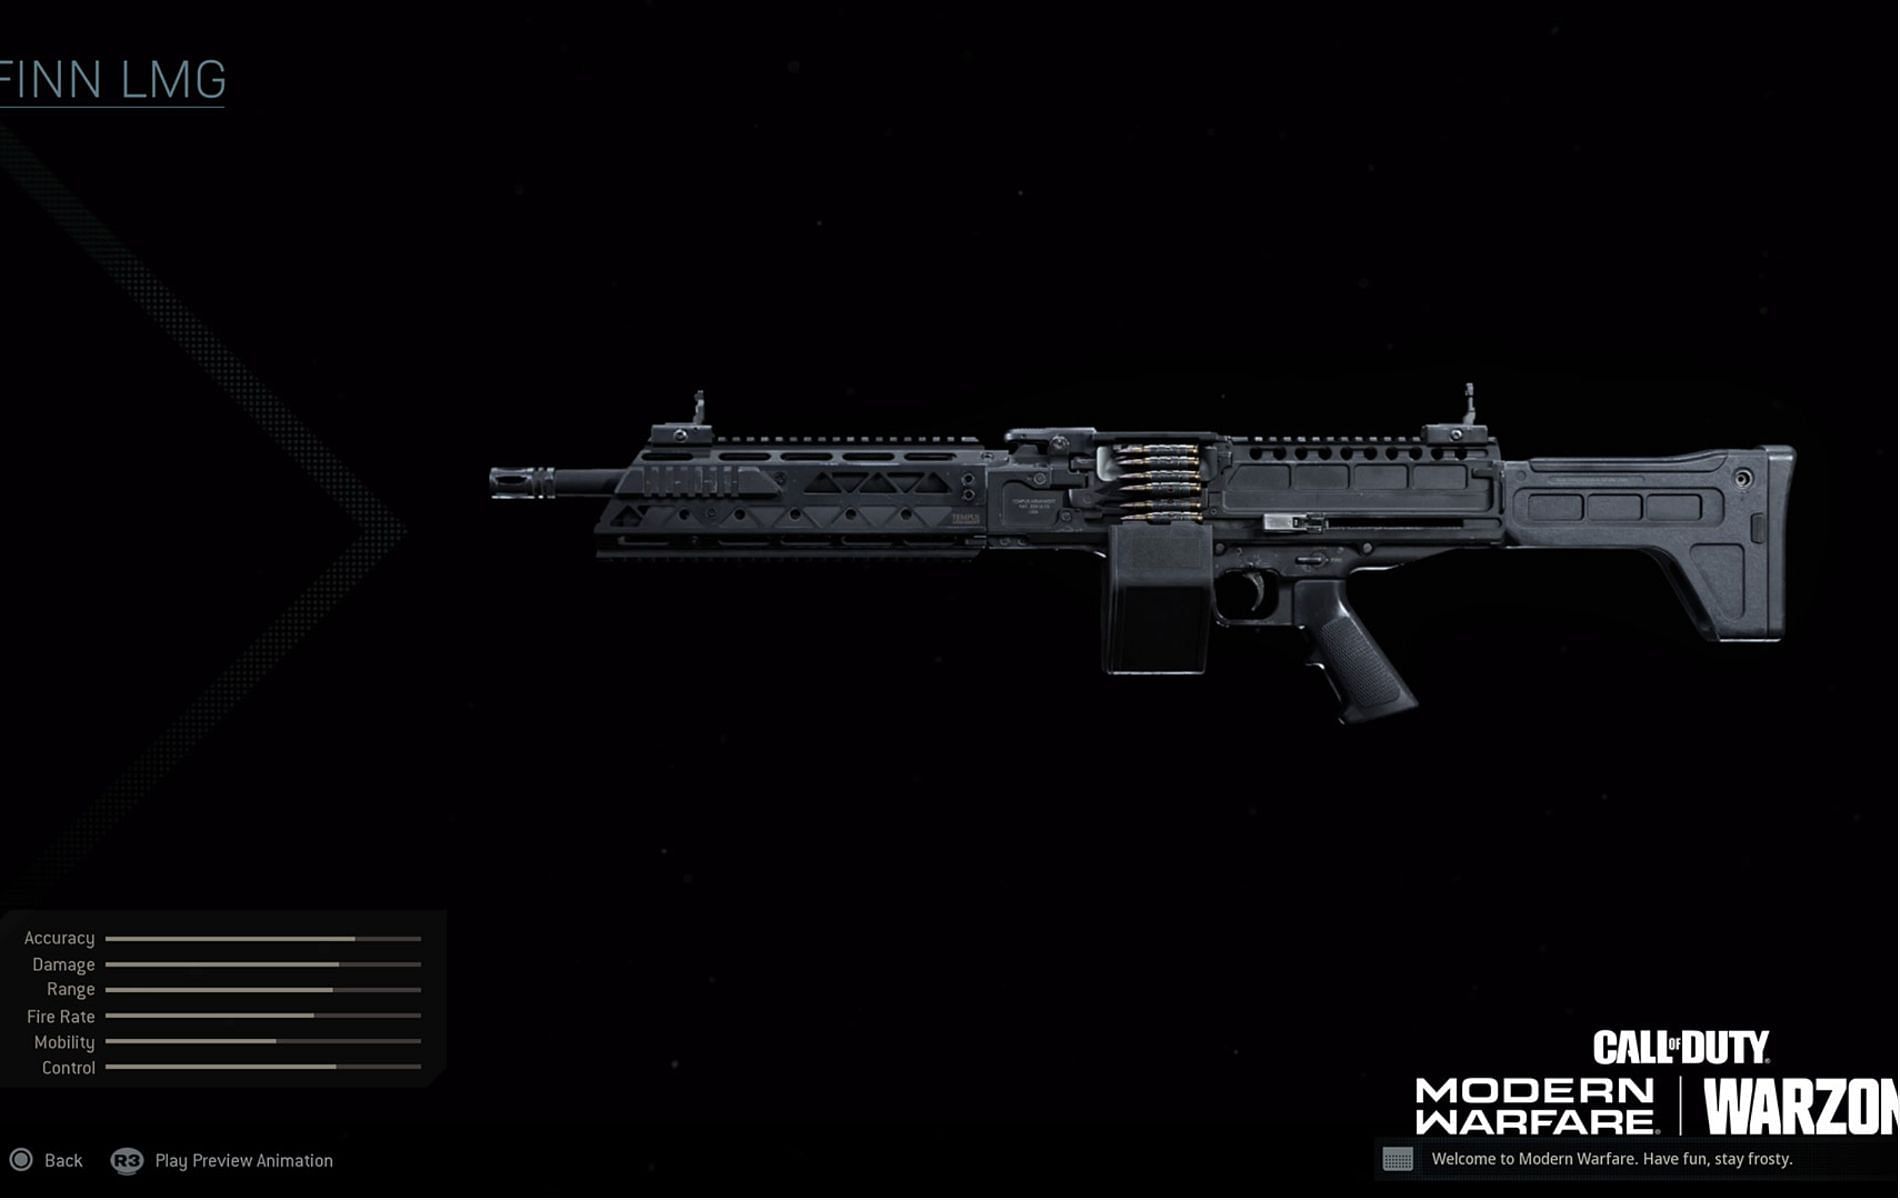 The FiNN LMG in Call of Duty Warzone (Image via Activision)